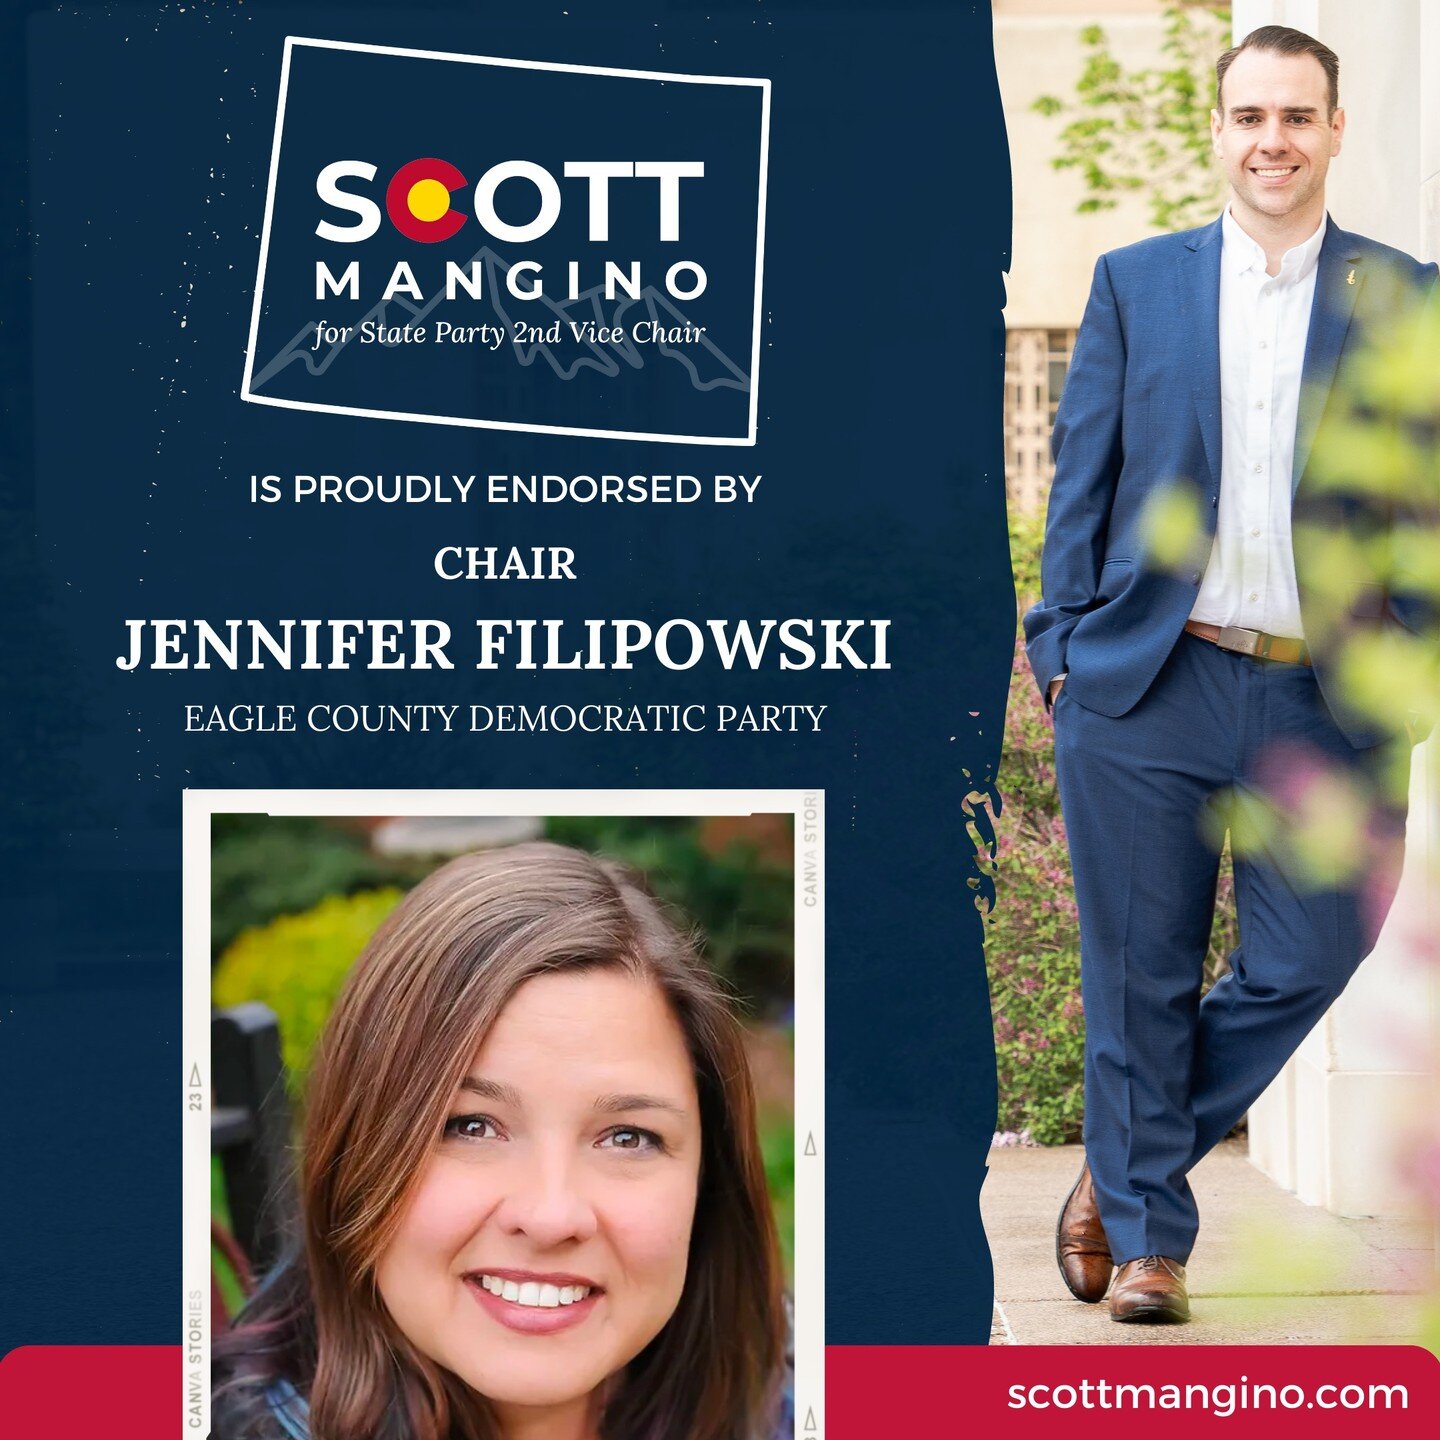 Organizing &amp; developing a talent pipeline in our mountain communities has been a staple of my campaign. I'm so thrilled to have the support &amp; endorsement of @eagledemsco Chair @jenfa01. I can't wait to get to work with her &amp; the rest of t